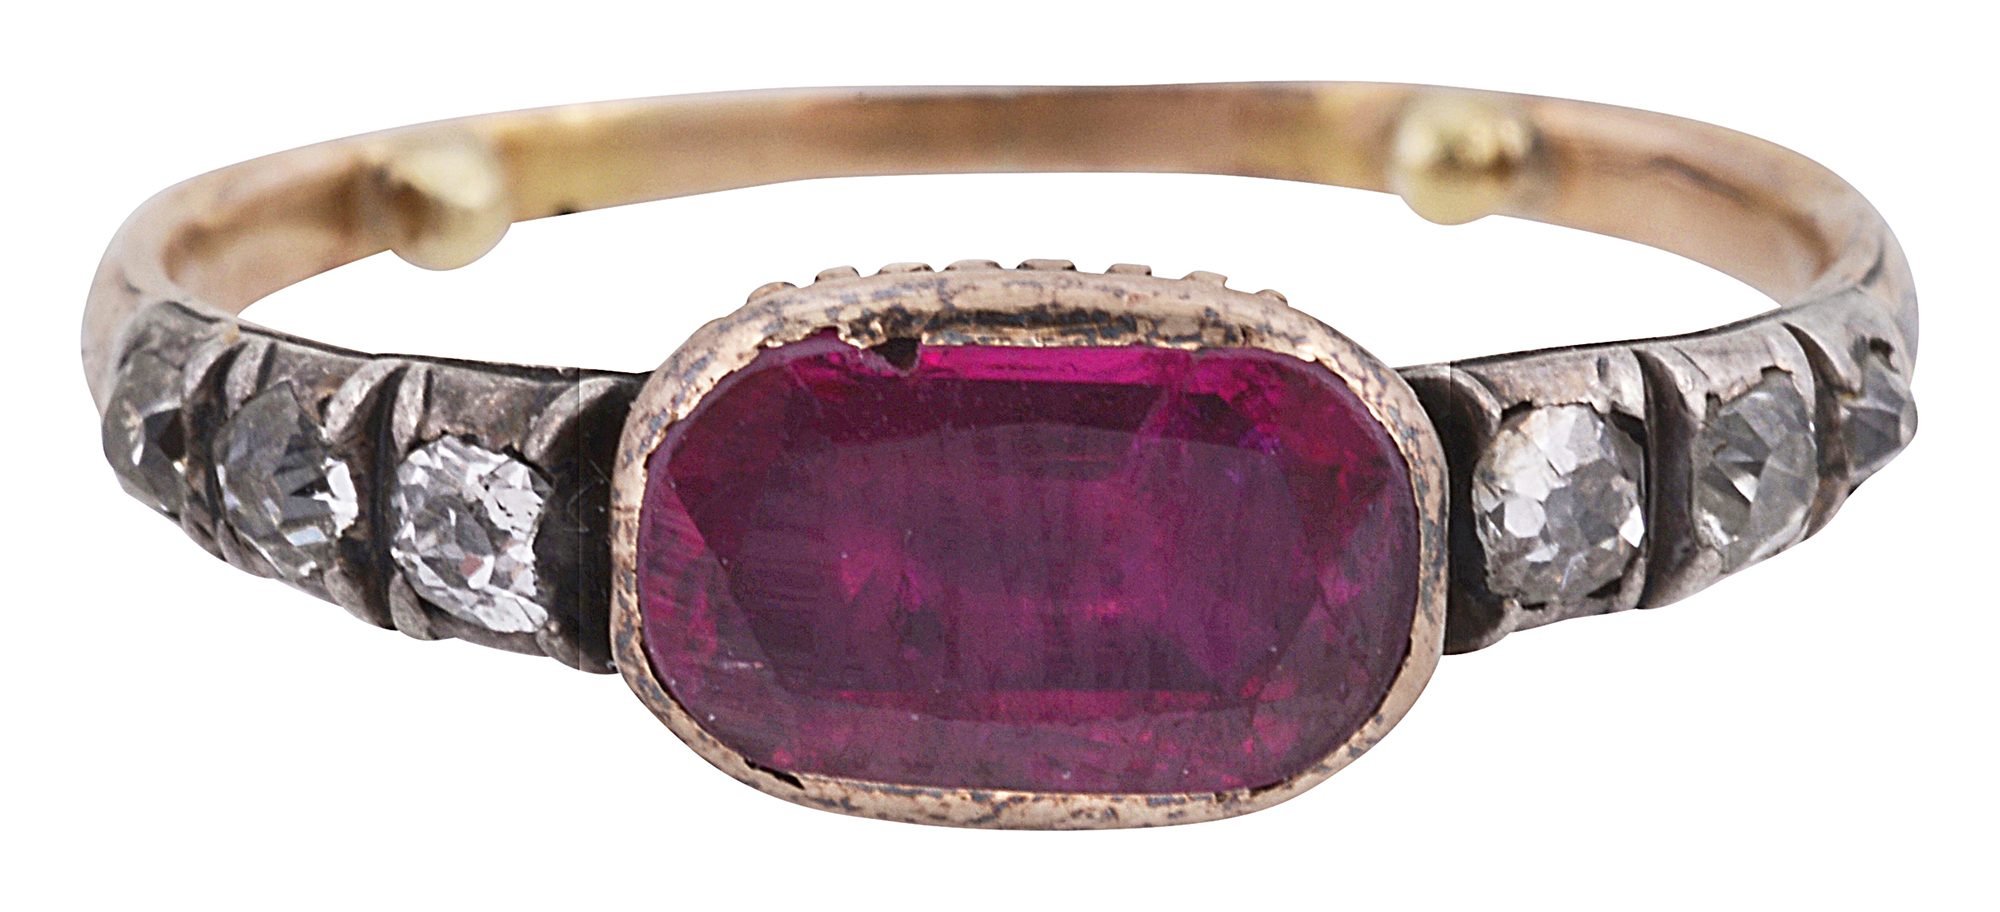 An early 18th century ruby and diamond-set ring circa 1710-1720